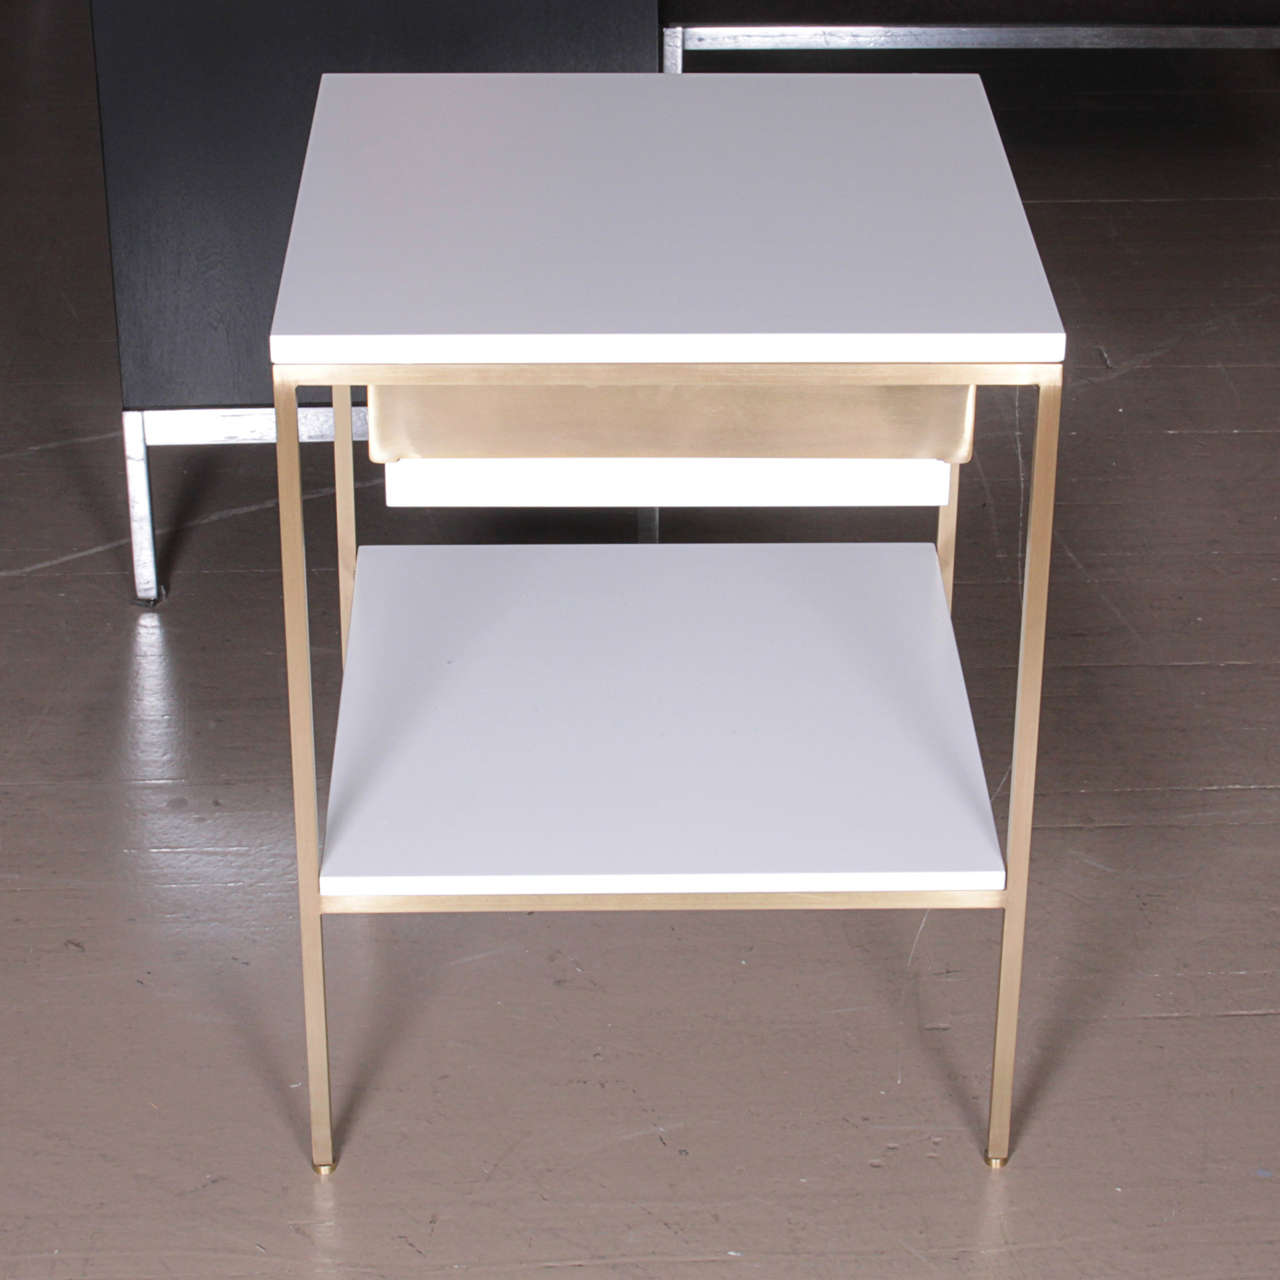 re, 392 Bedside Tables in Soft Chamois Satin In Excellent Condition For Sale In New York, NY